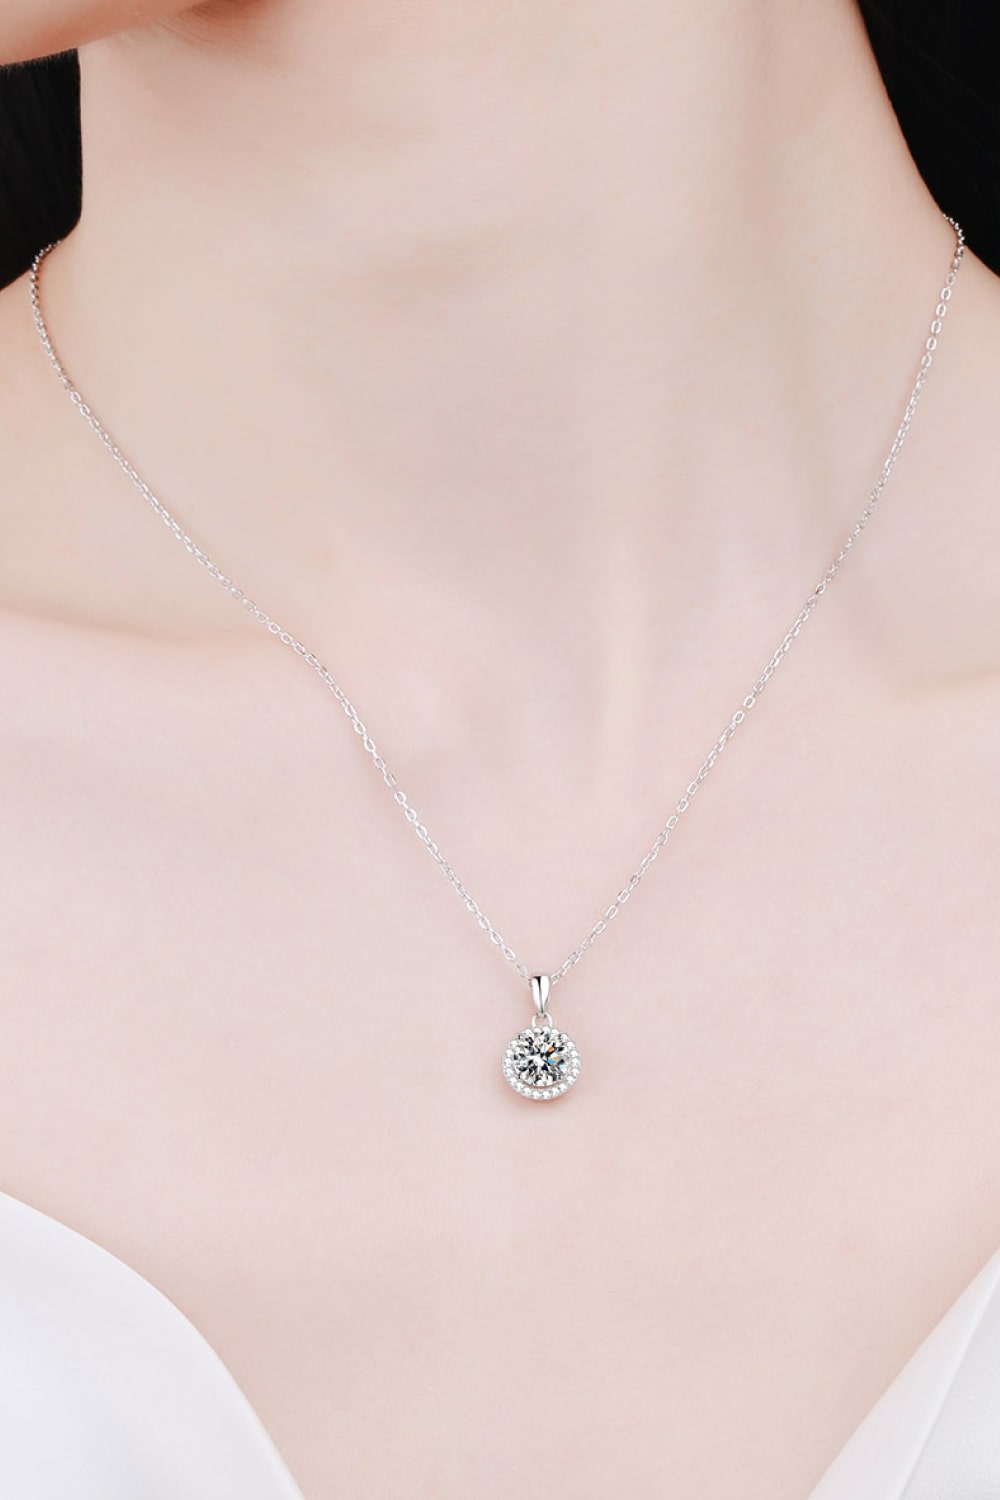 Chance to Charm 1 Carat Moissanite Round Pendant Necklace